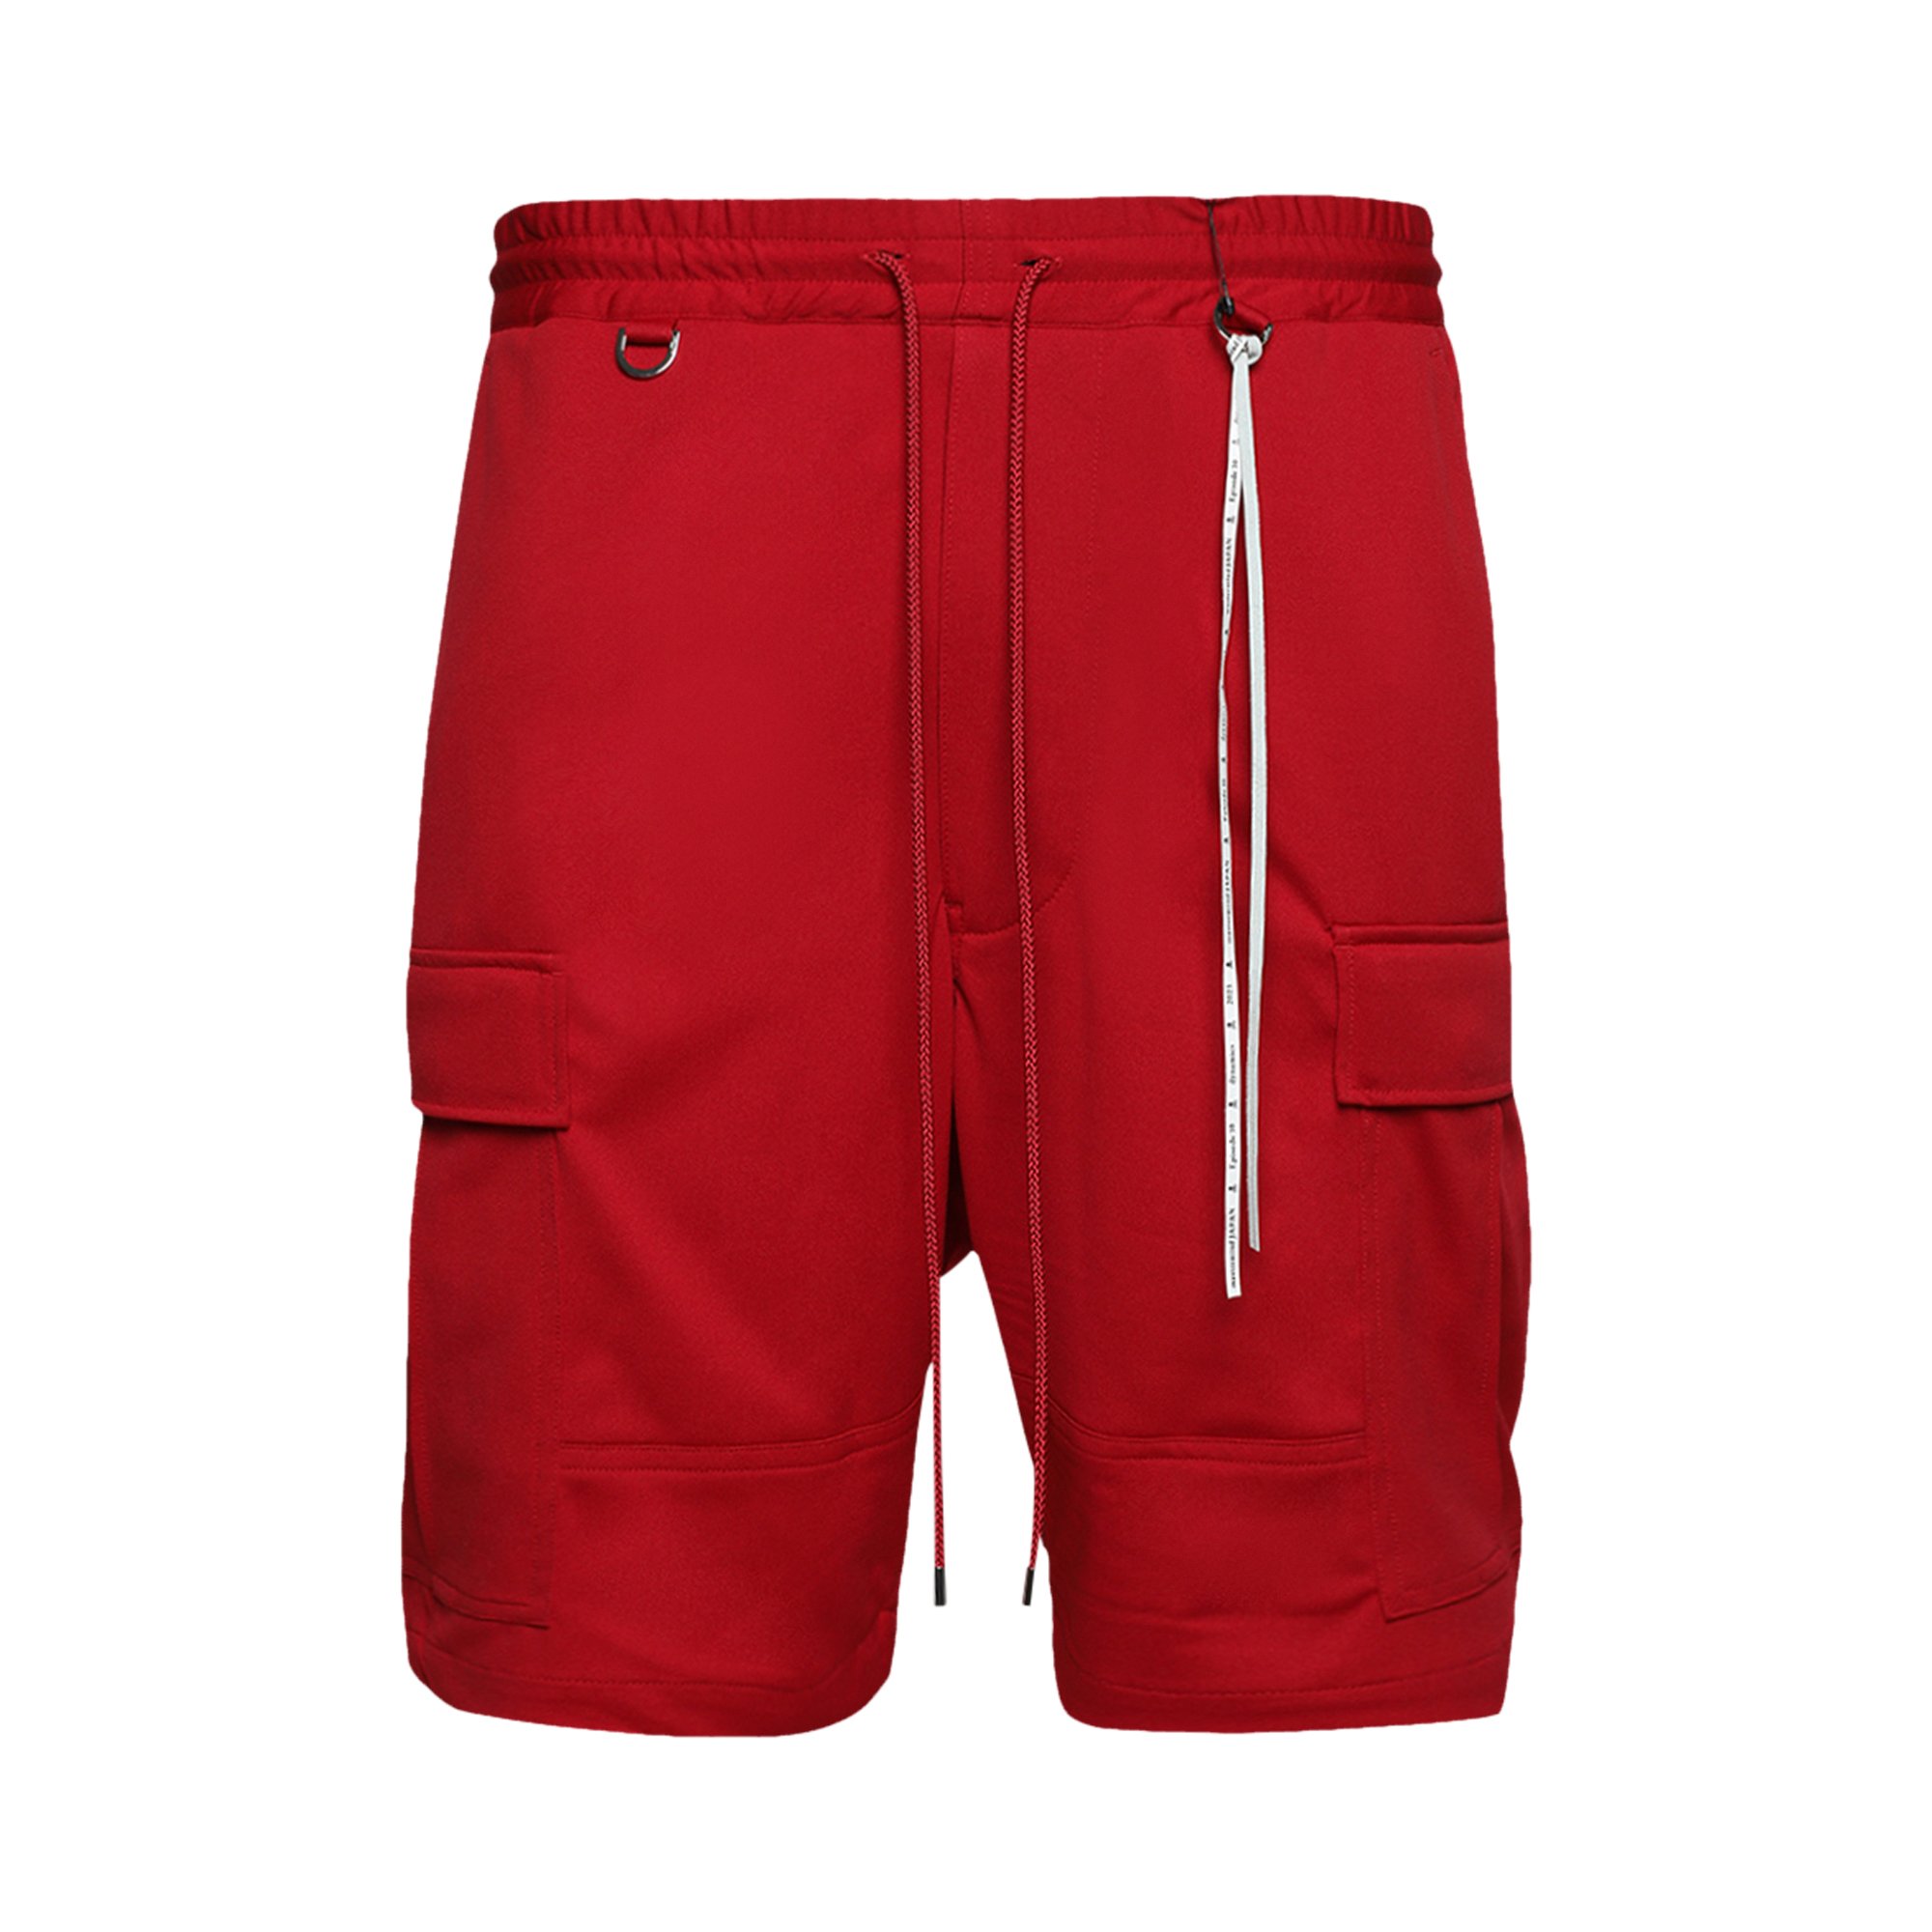 Buy Mastermind World Shorts 'Red' - MJ23E10 TS079 RED | GOAT IT